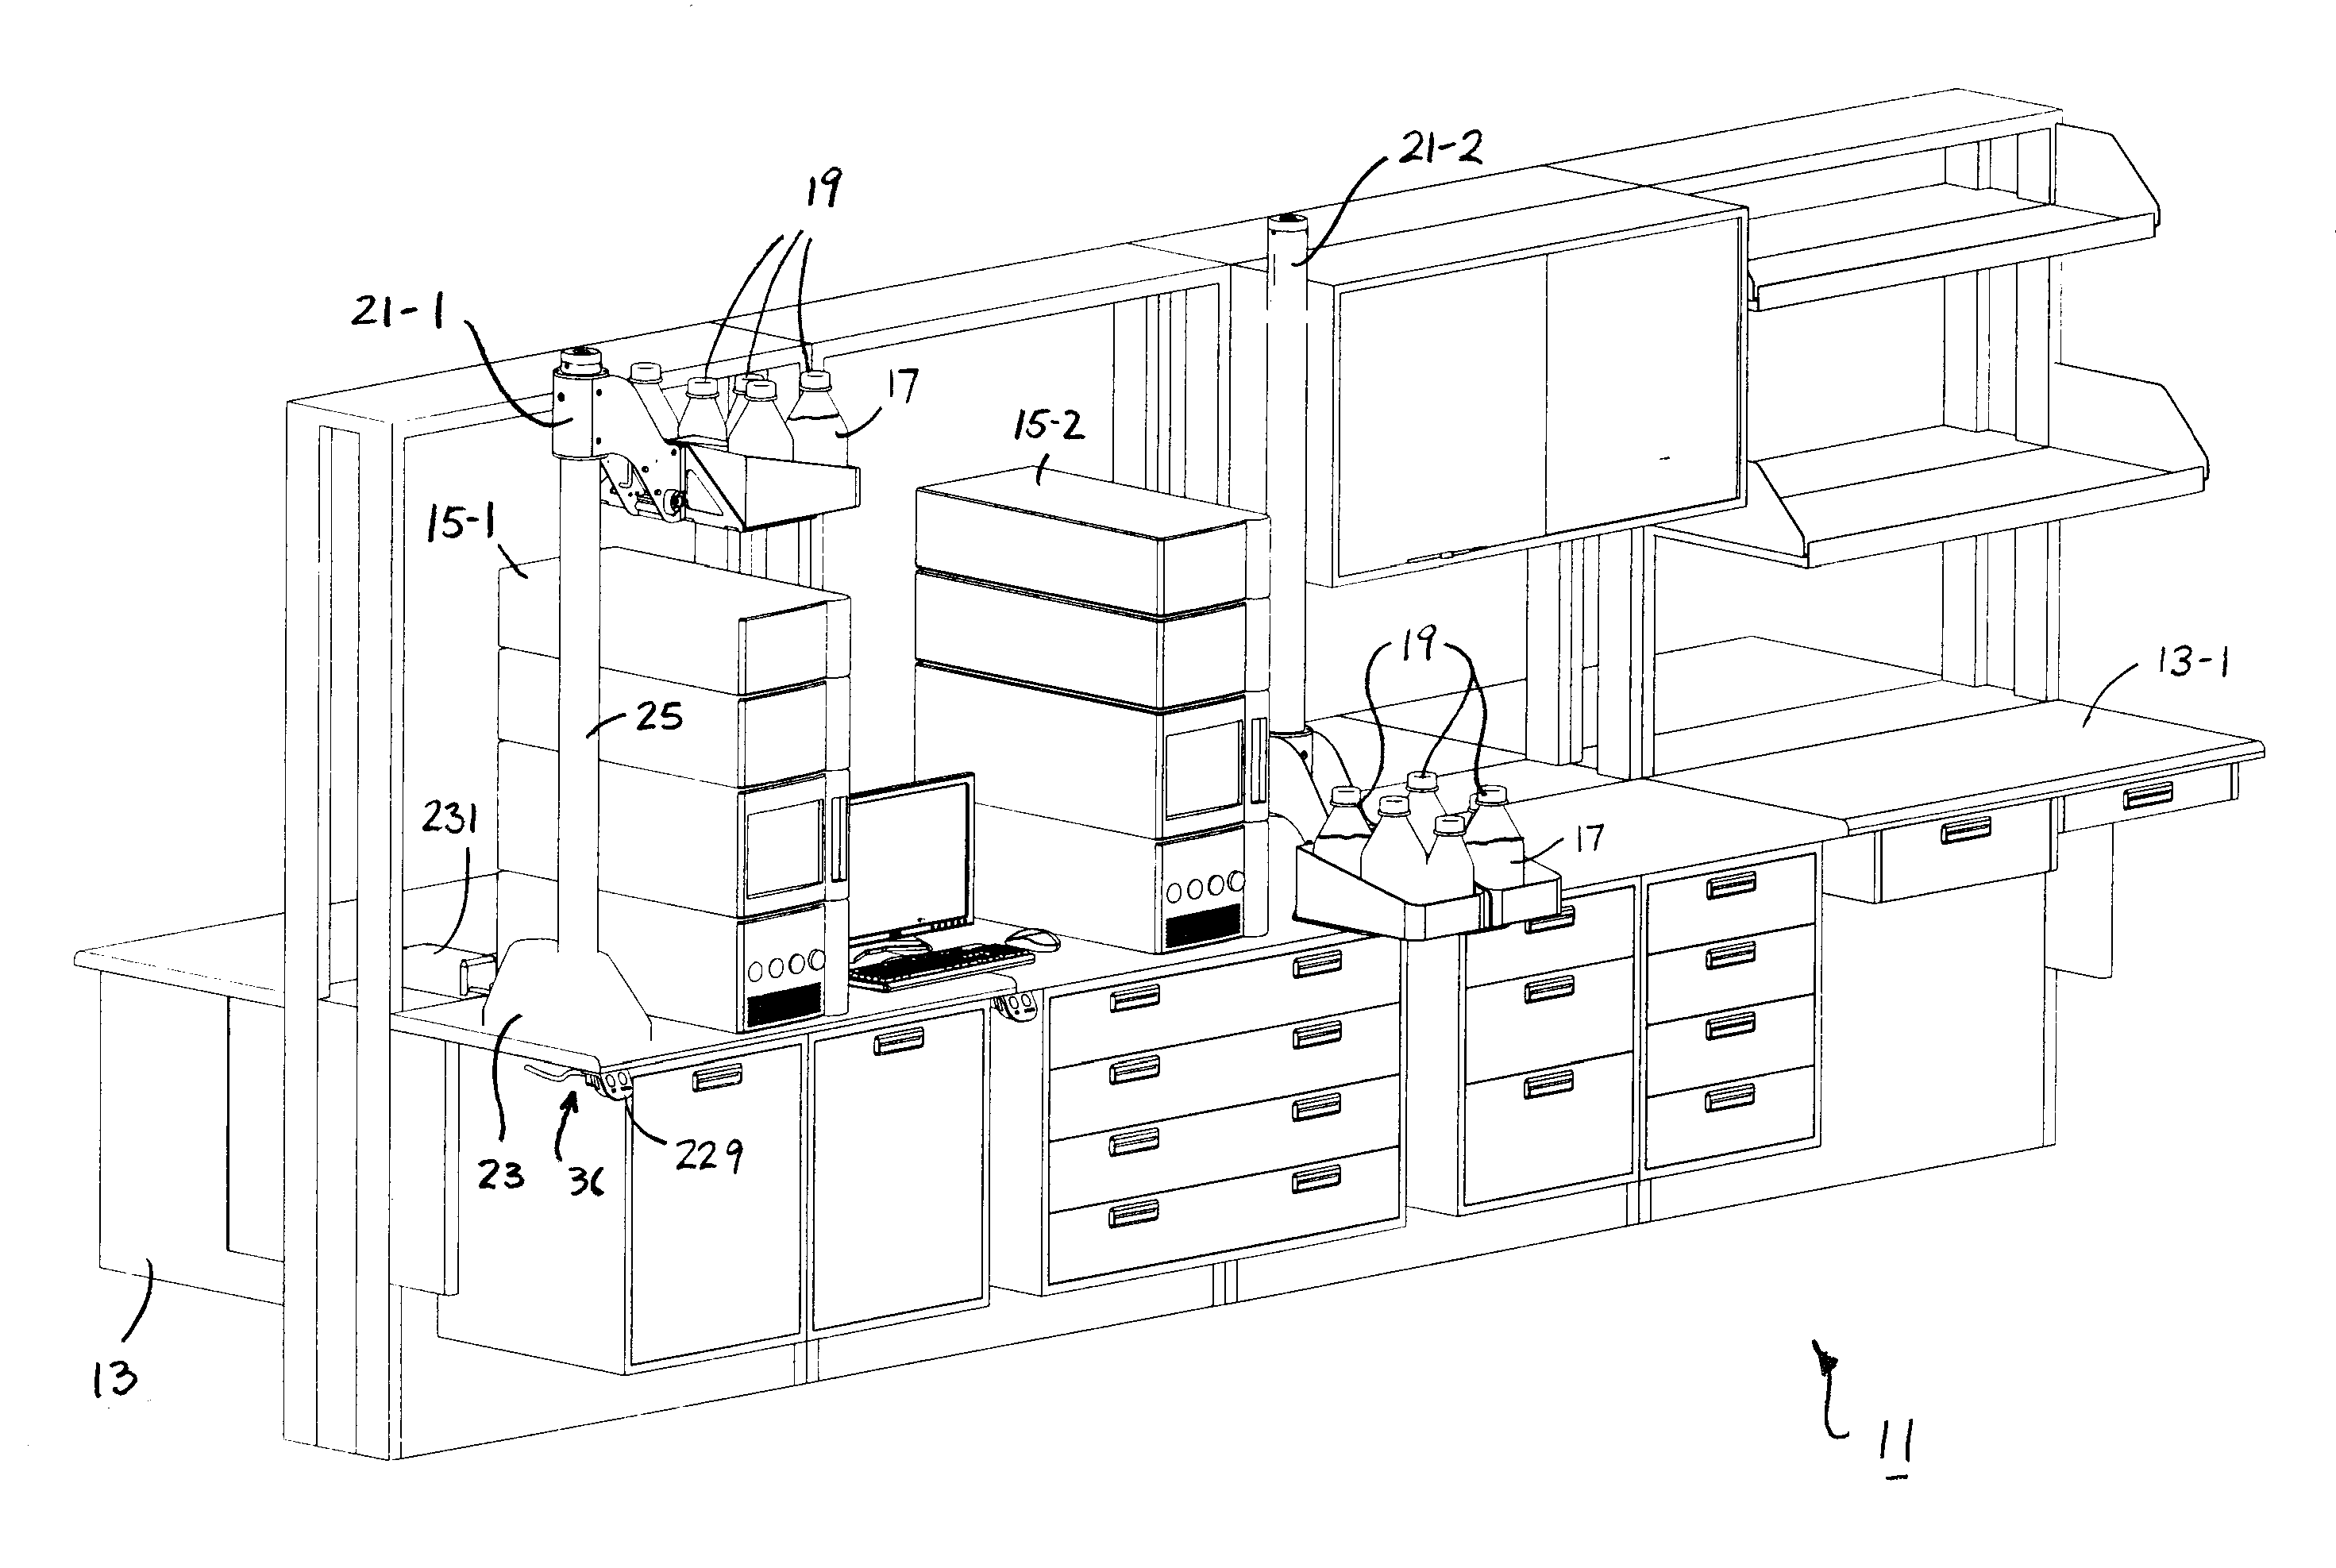 Fluid delivery system and lift for use in conjunction therewith